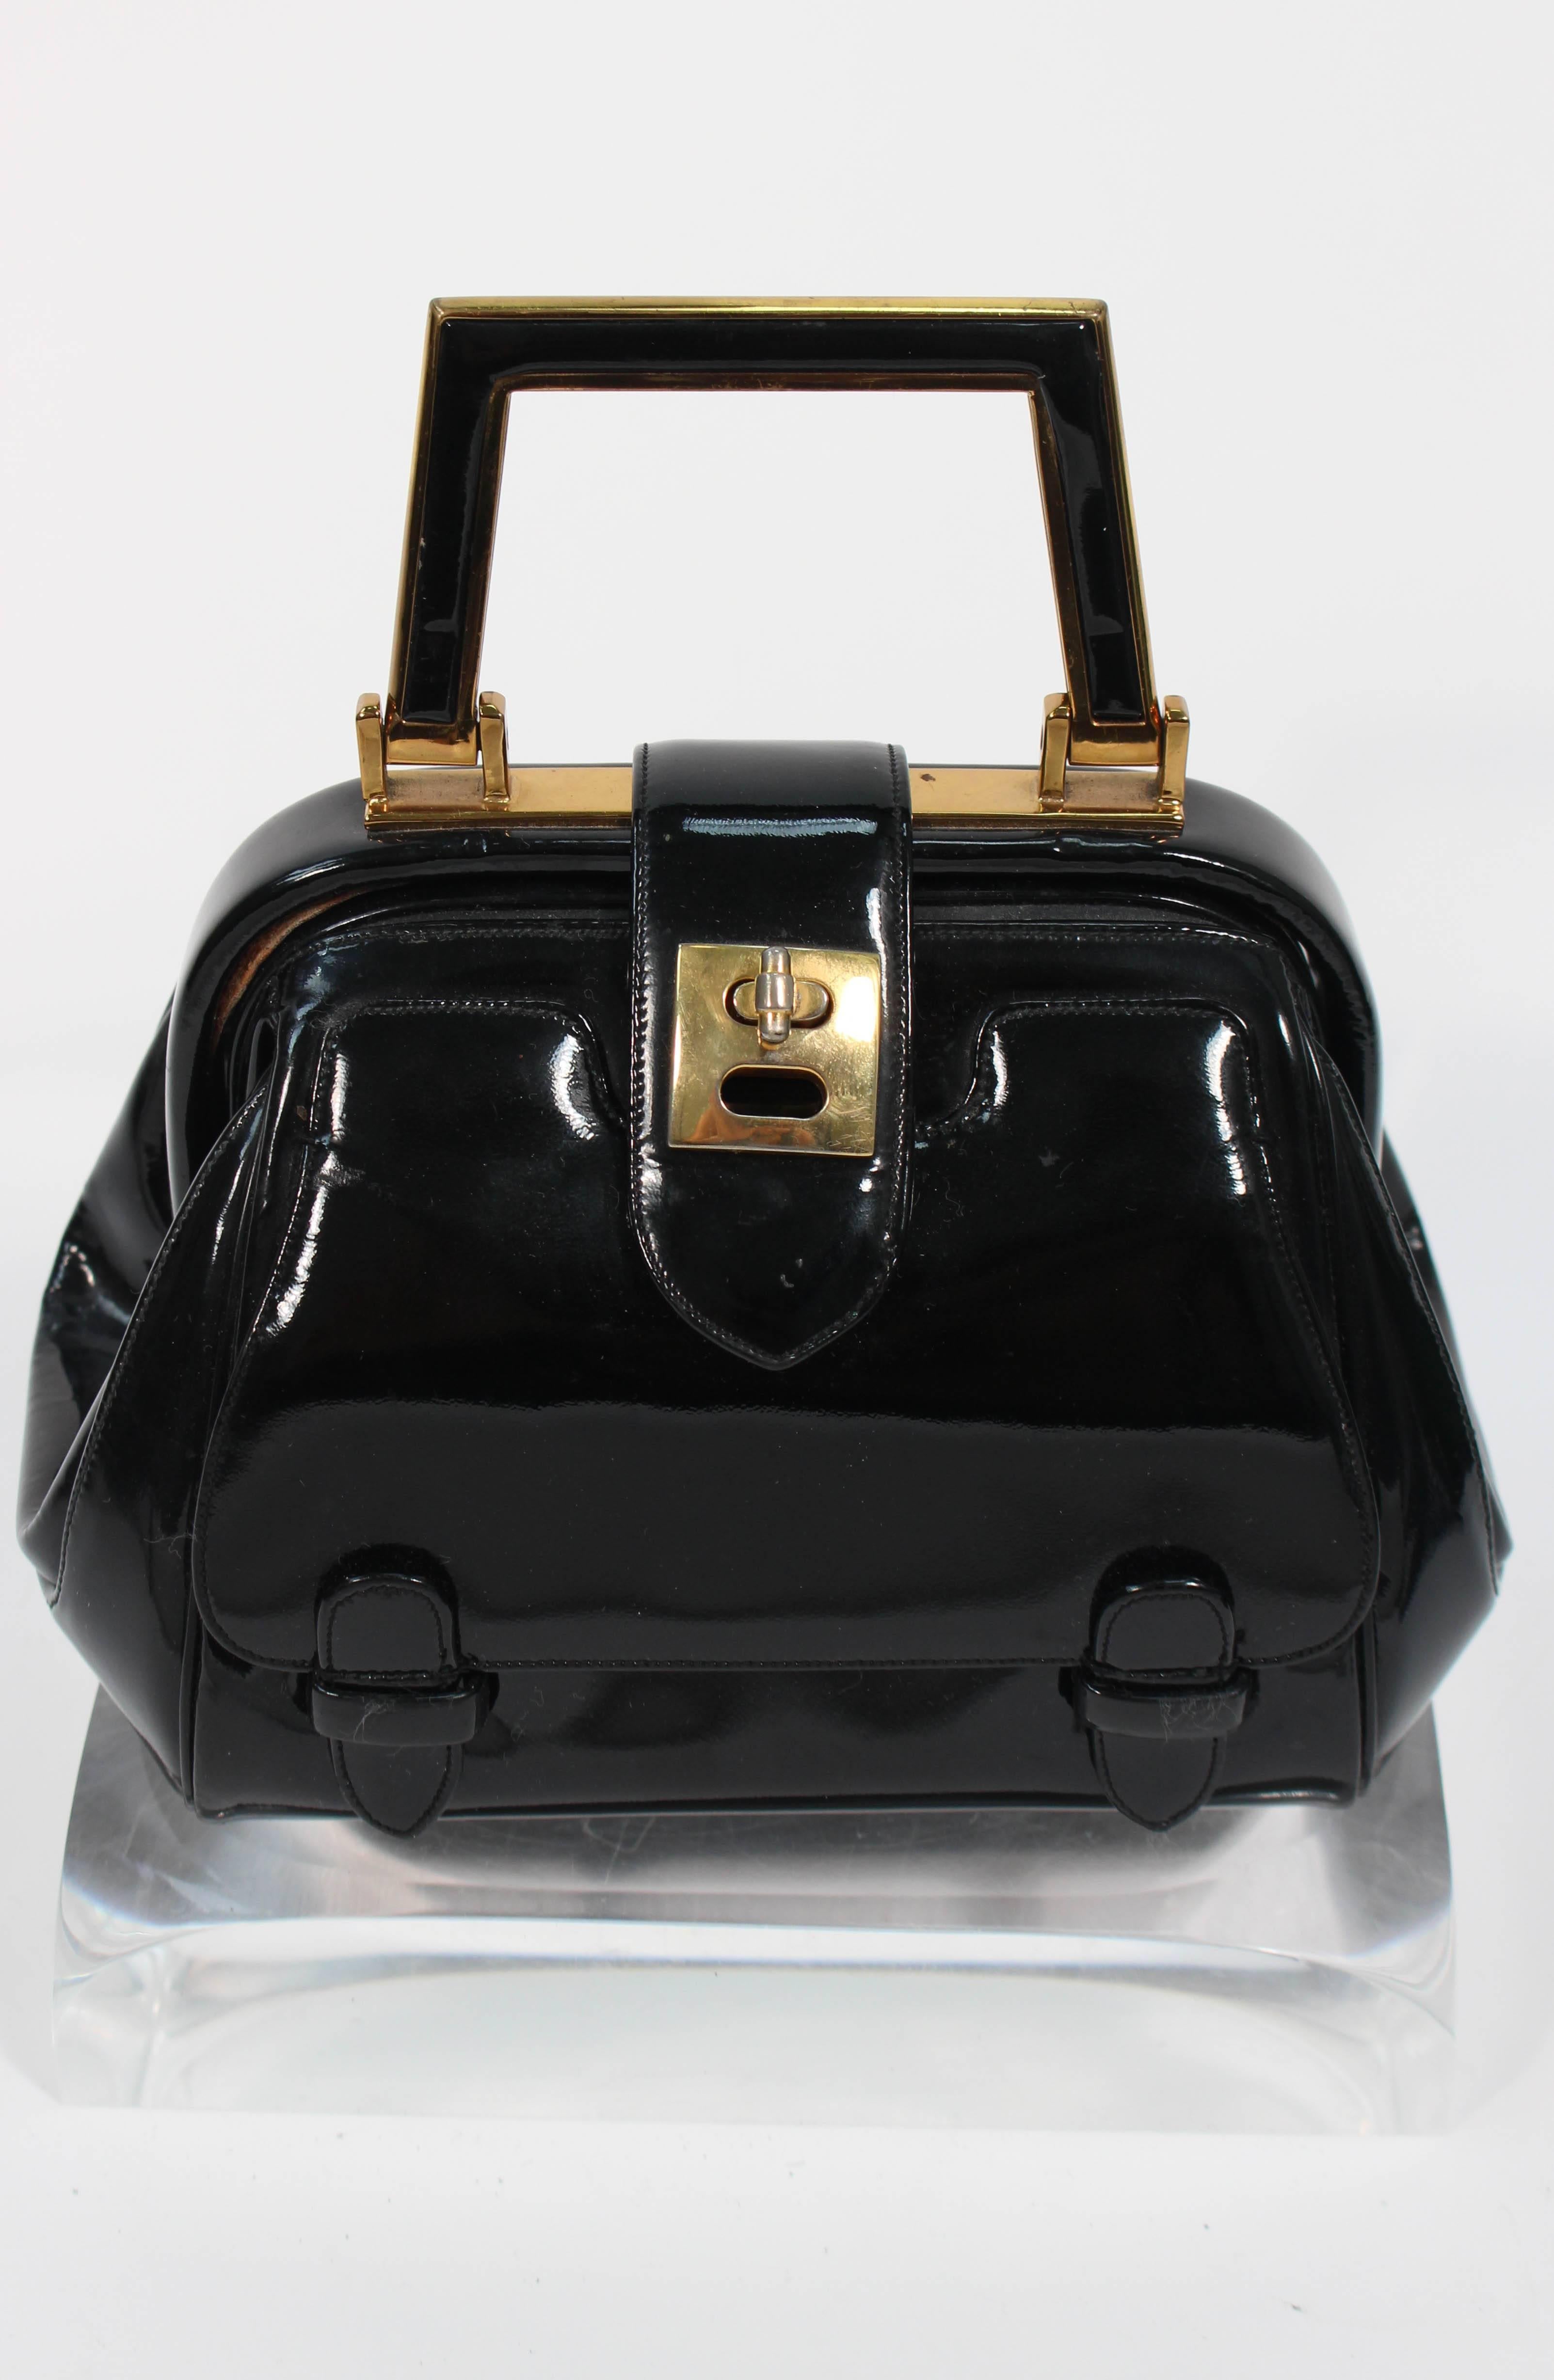 This Judith Leiber handbag is composed of a black patent leather with gold tone hardware. It is a very rare 1960's design featuring turn style closures with an exterior pocket. There are interior compartments with a silk lining. In excellent vintage